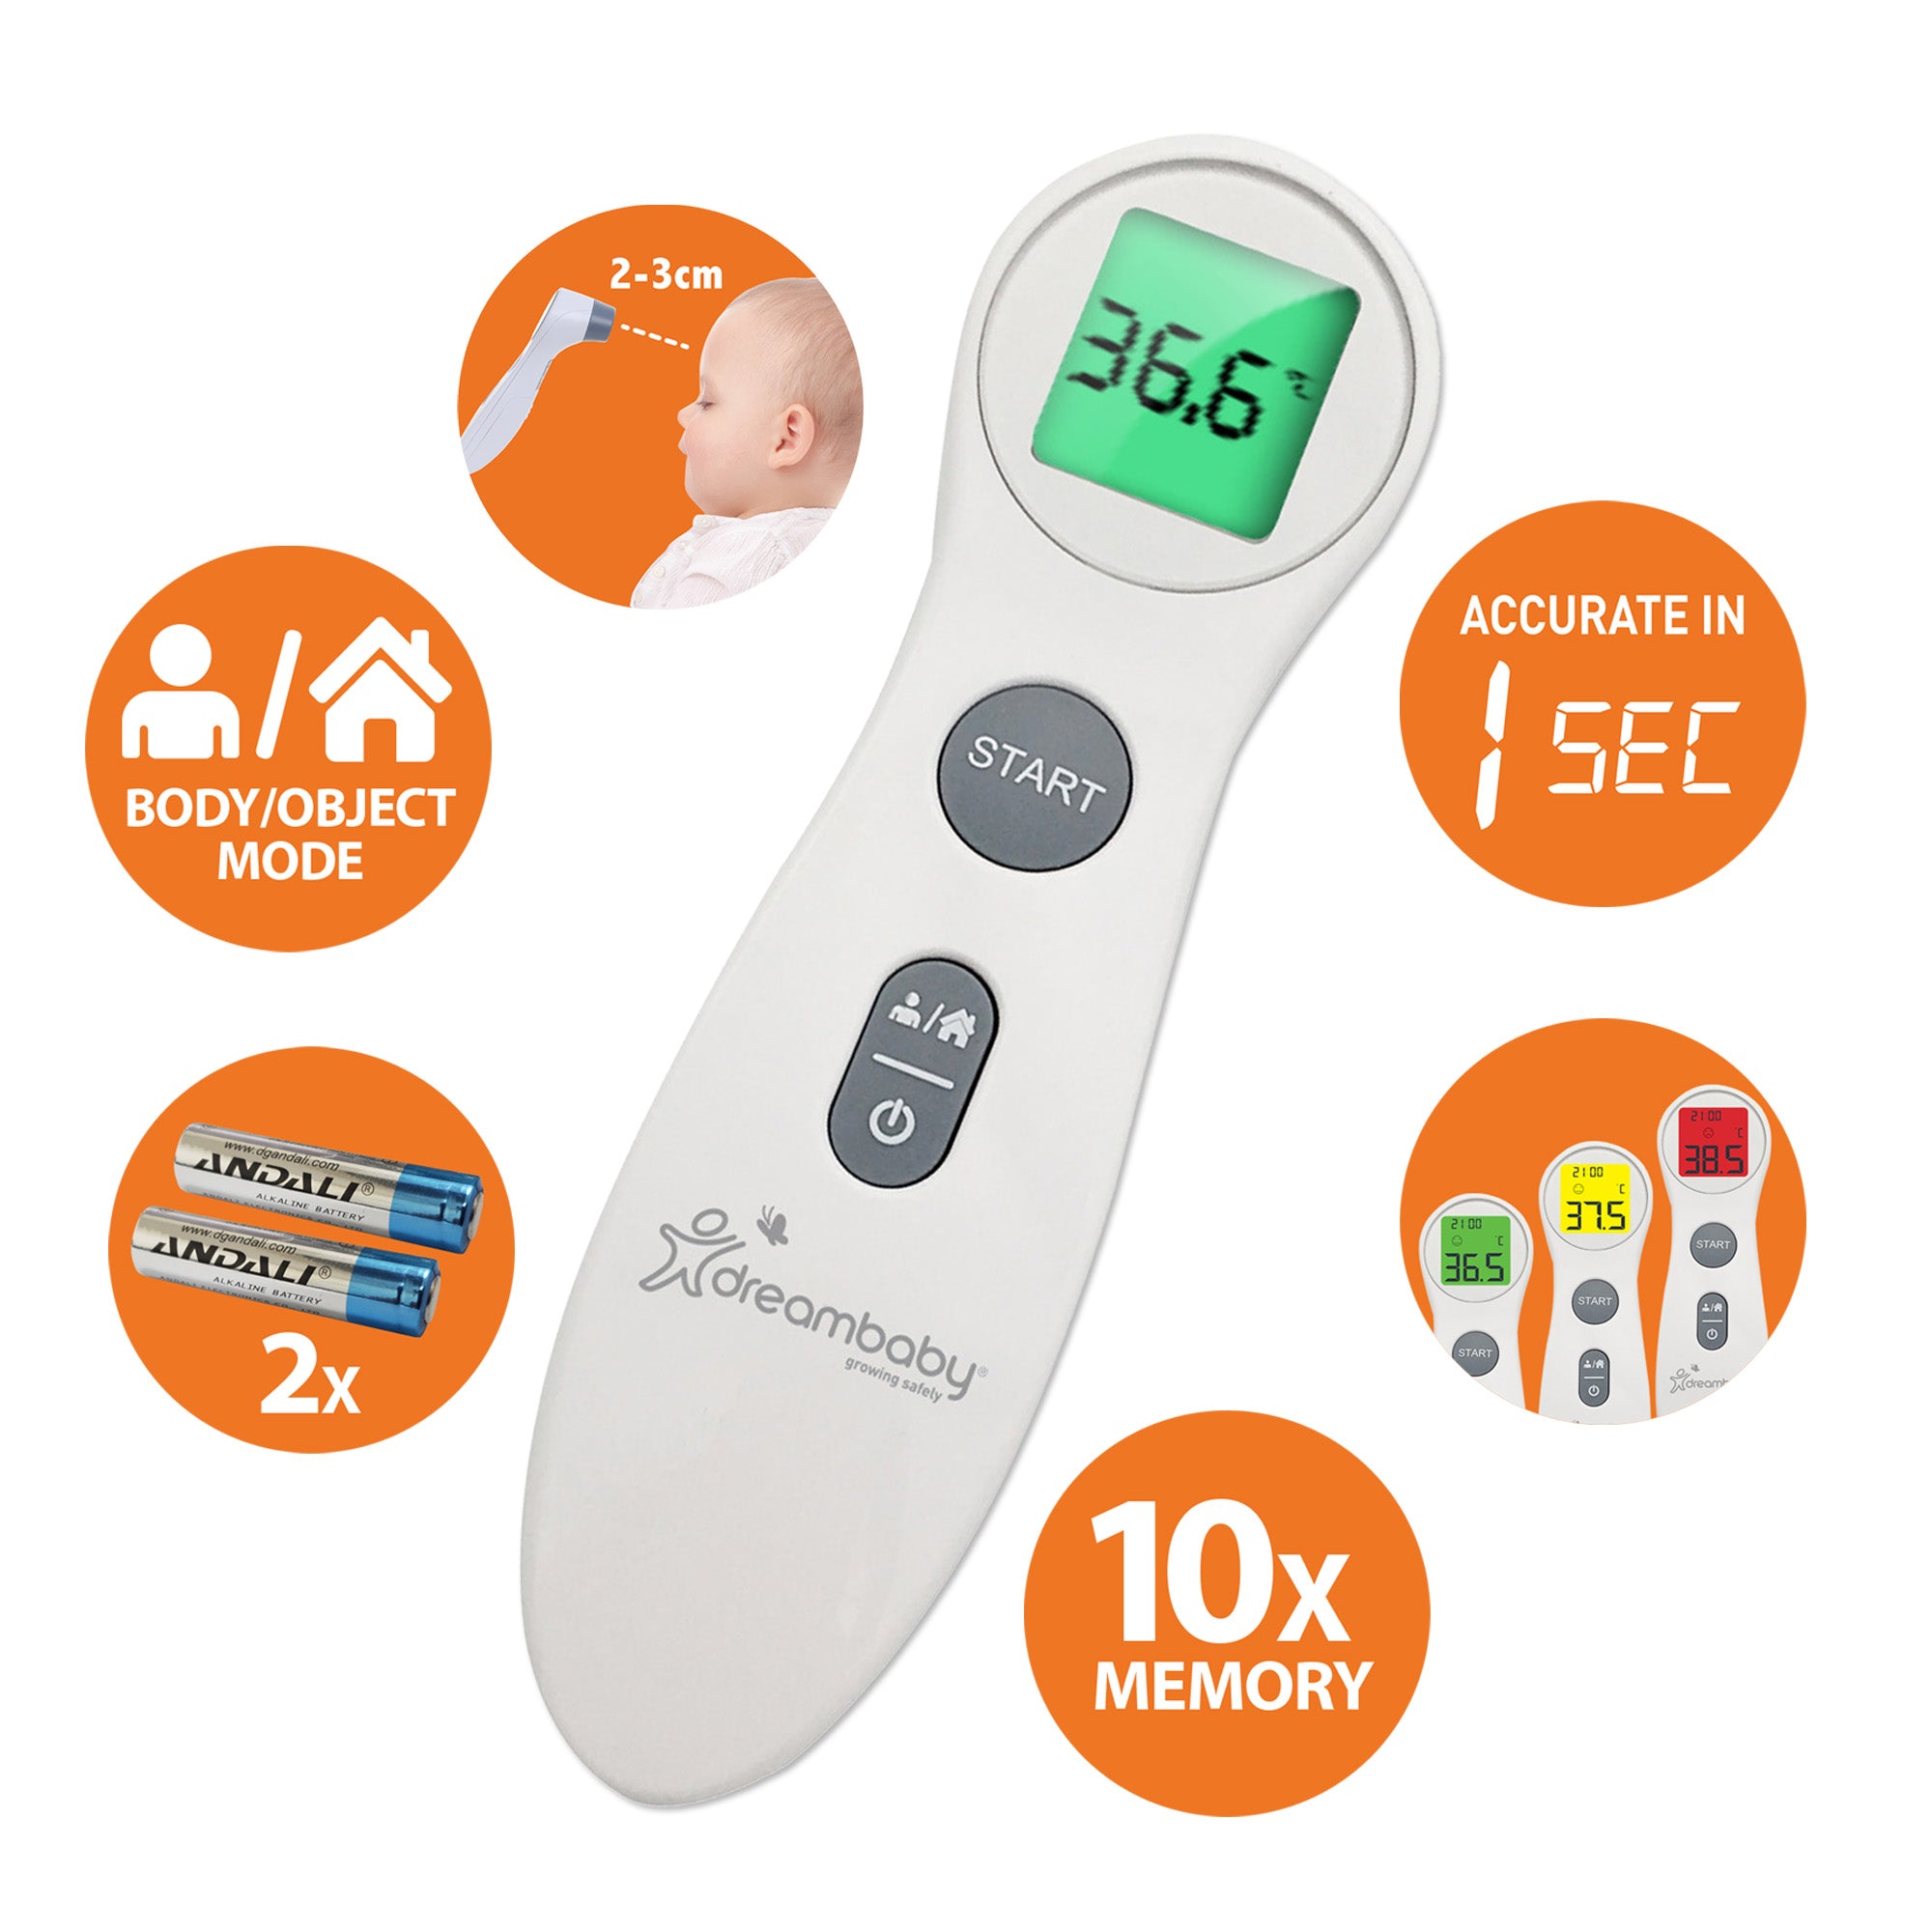 Dreambaby Non-Contact Fever Alert Infrared Forehead Thermometer